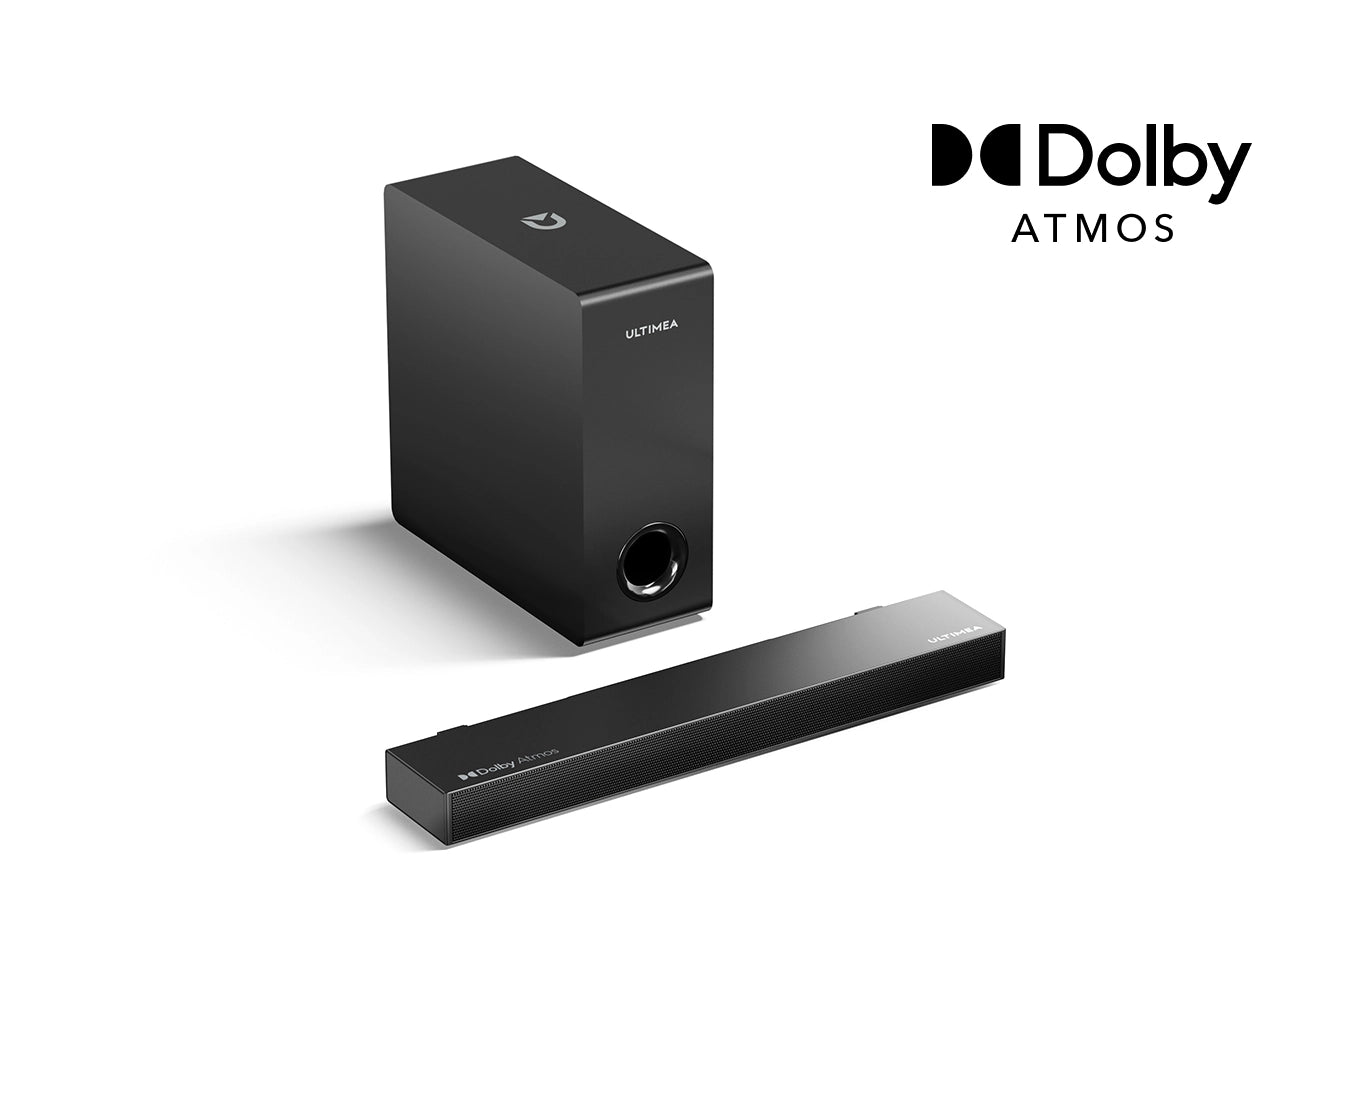 ULTIMEA 5.1 Dolby Atmos Sound Bar, Peak Power 410W, Sound Bar for Smart TV  with Subwoofer, 3D Surround Sound System for TV, Surround and Bass